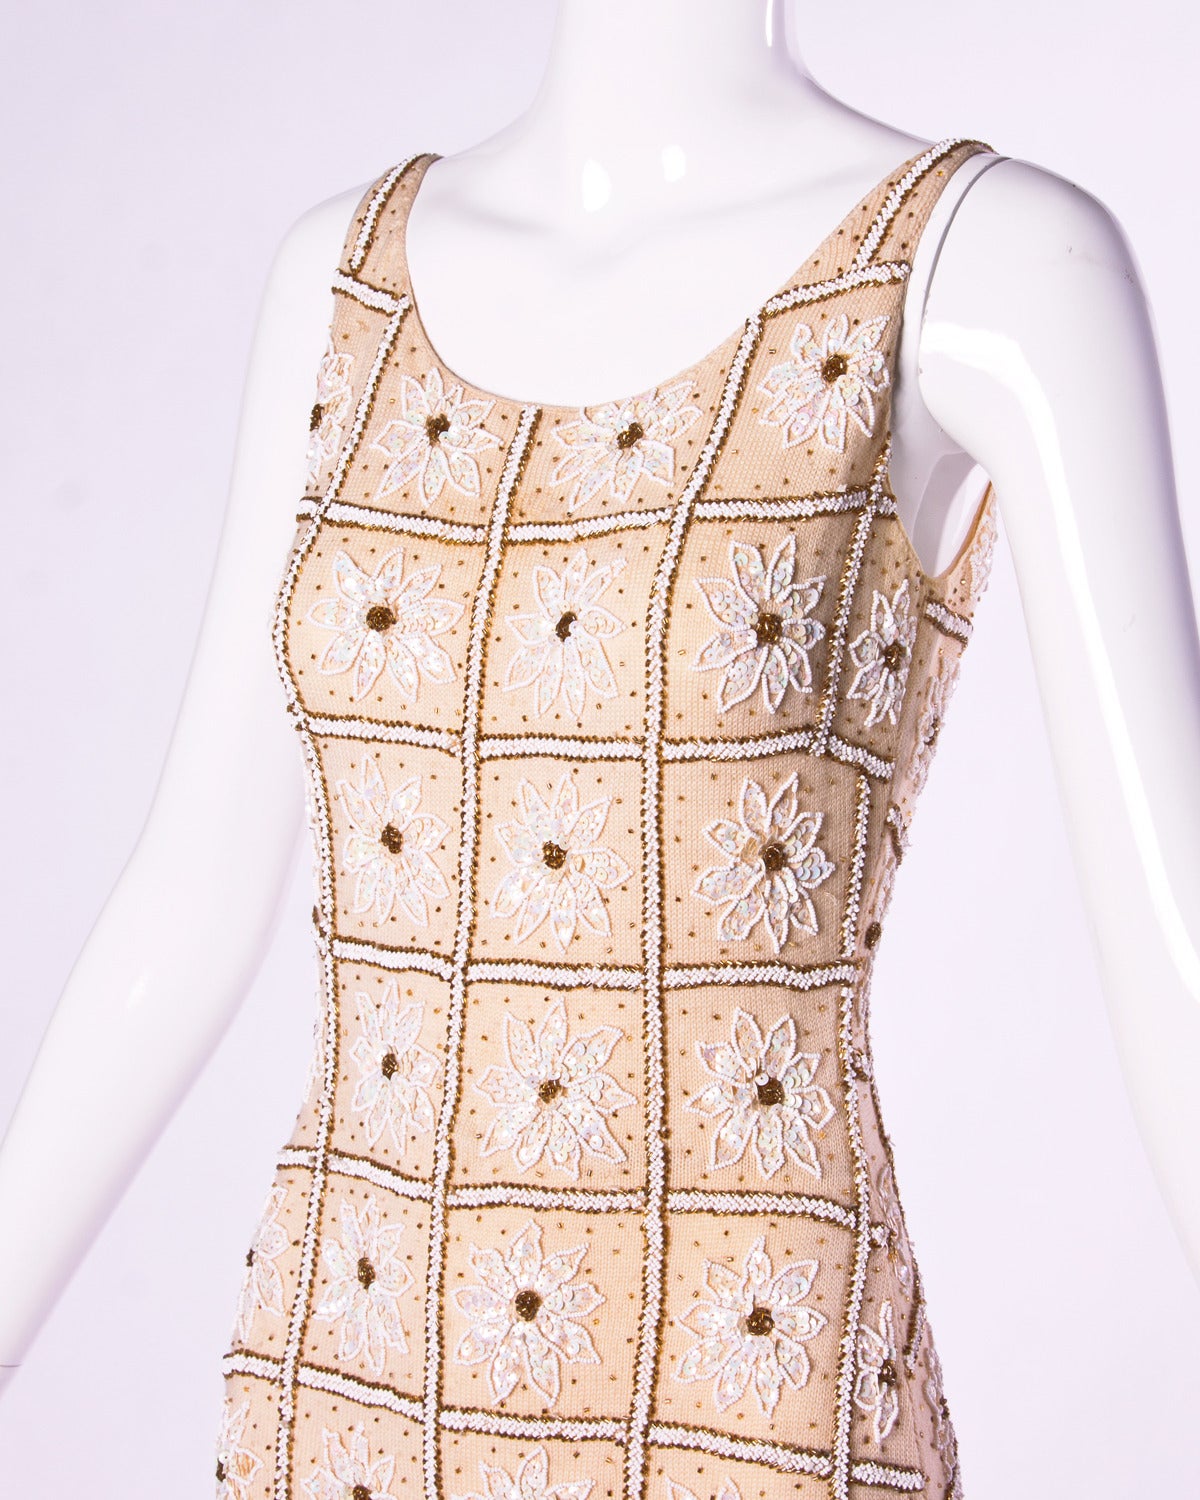 Gorgeous and heavy hand-beaded and sequin wool knit dress. Unlined. Back metal zip and hook closure. Fabric contains some stretch.

Details:

Unlined
Back Metal Zip Closure
Circa: 1960s
Estimated Size: XS
Color: Nude / White /